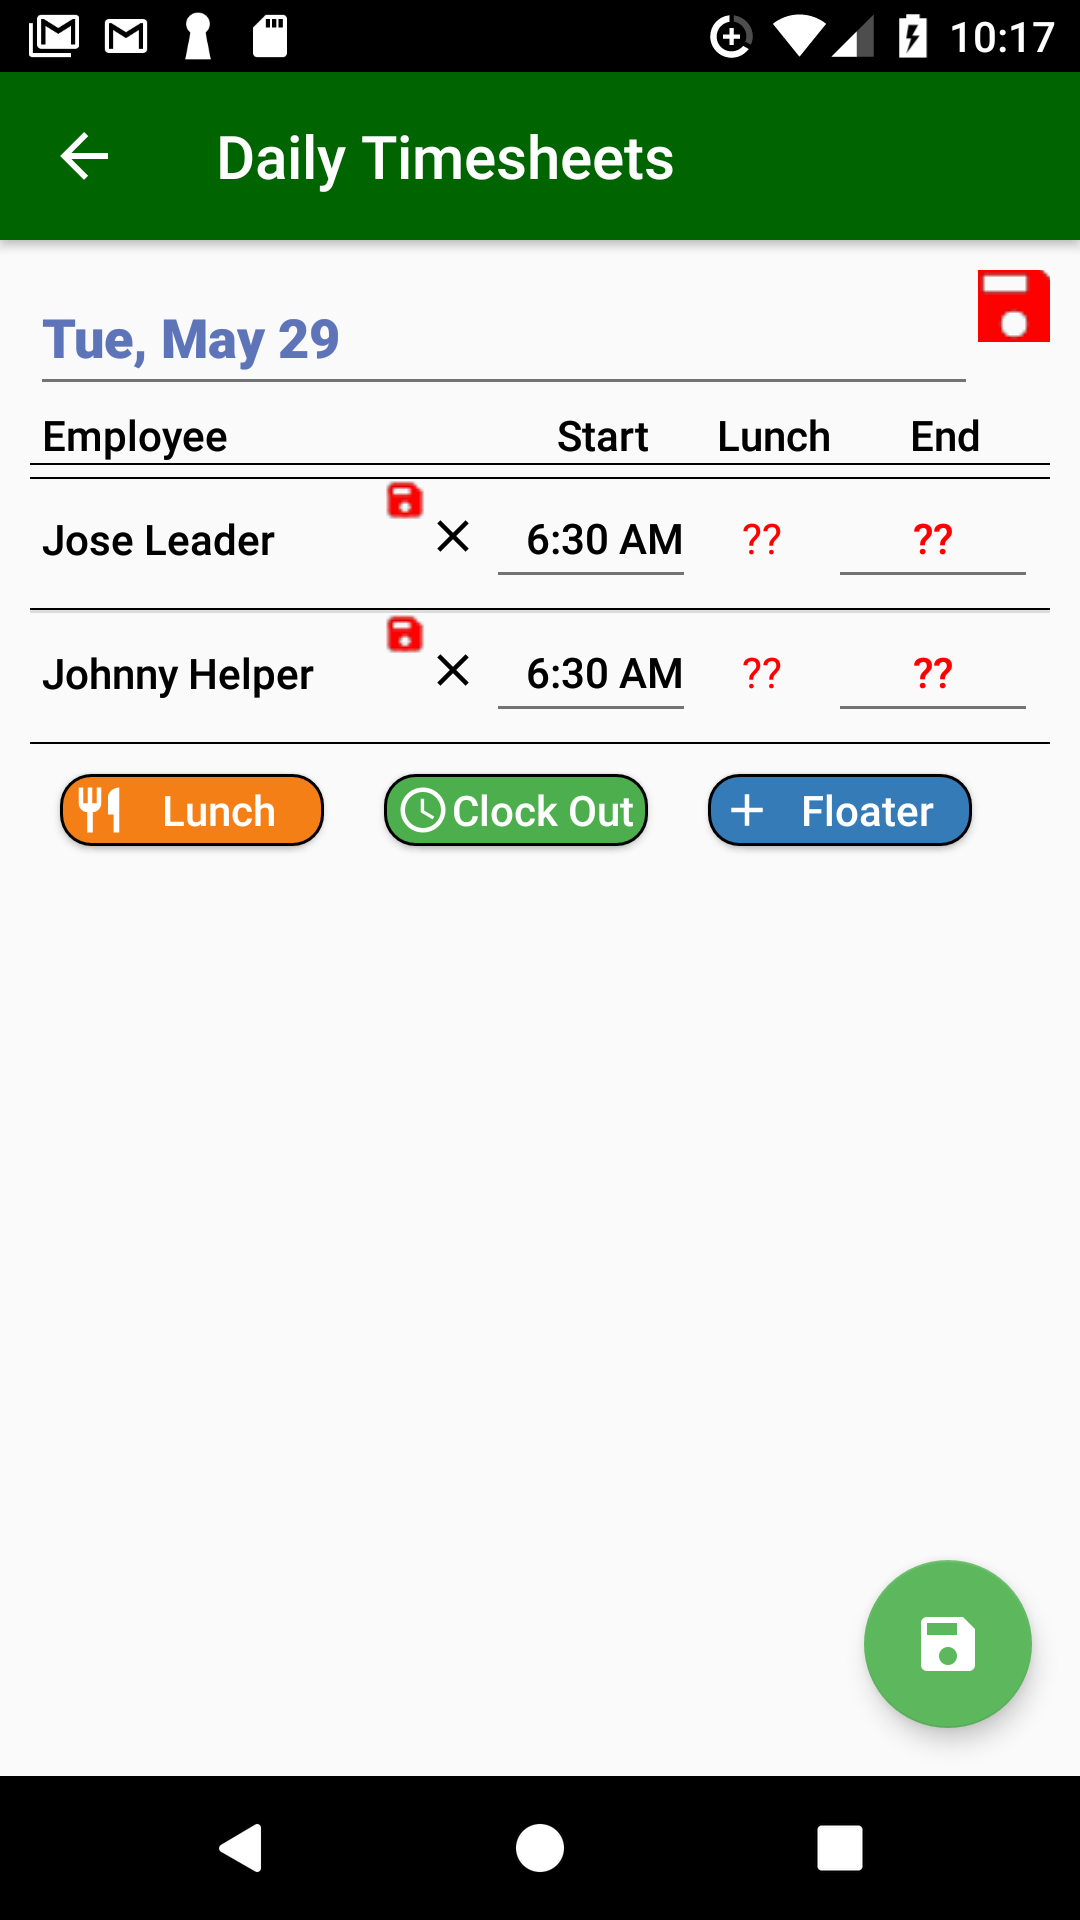 Crews enter timesheets with Field Assistant mobile app